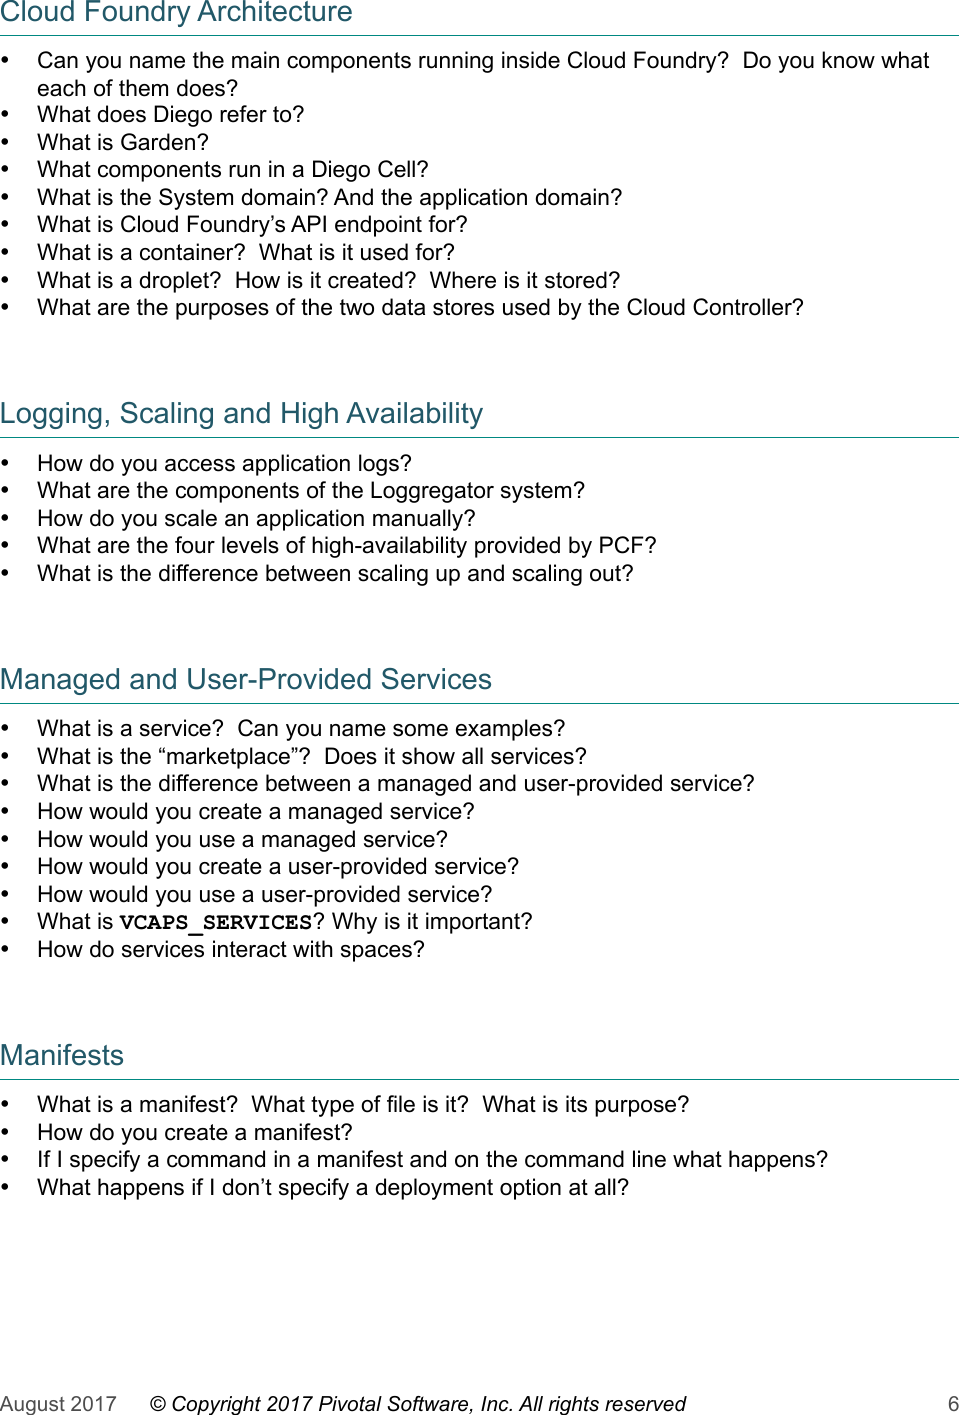 Page 6 of 9 - Big Data Vendor PCF-Dev1.6-1.11-Certification-Study-Guide